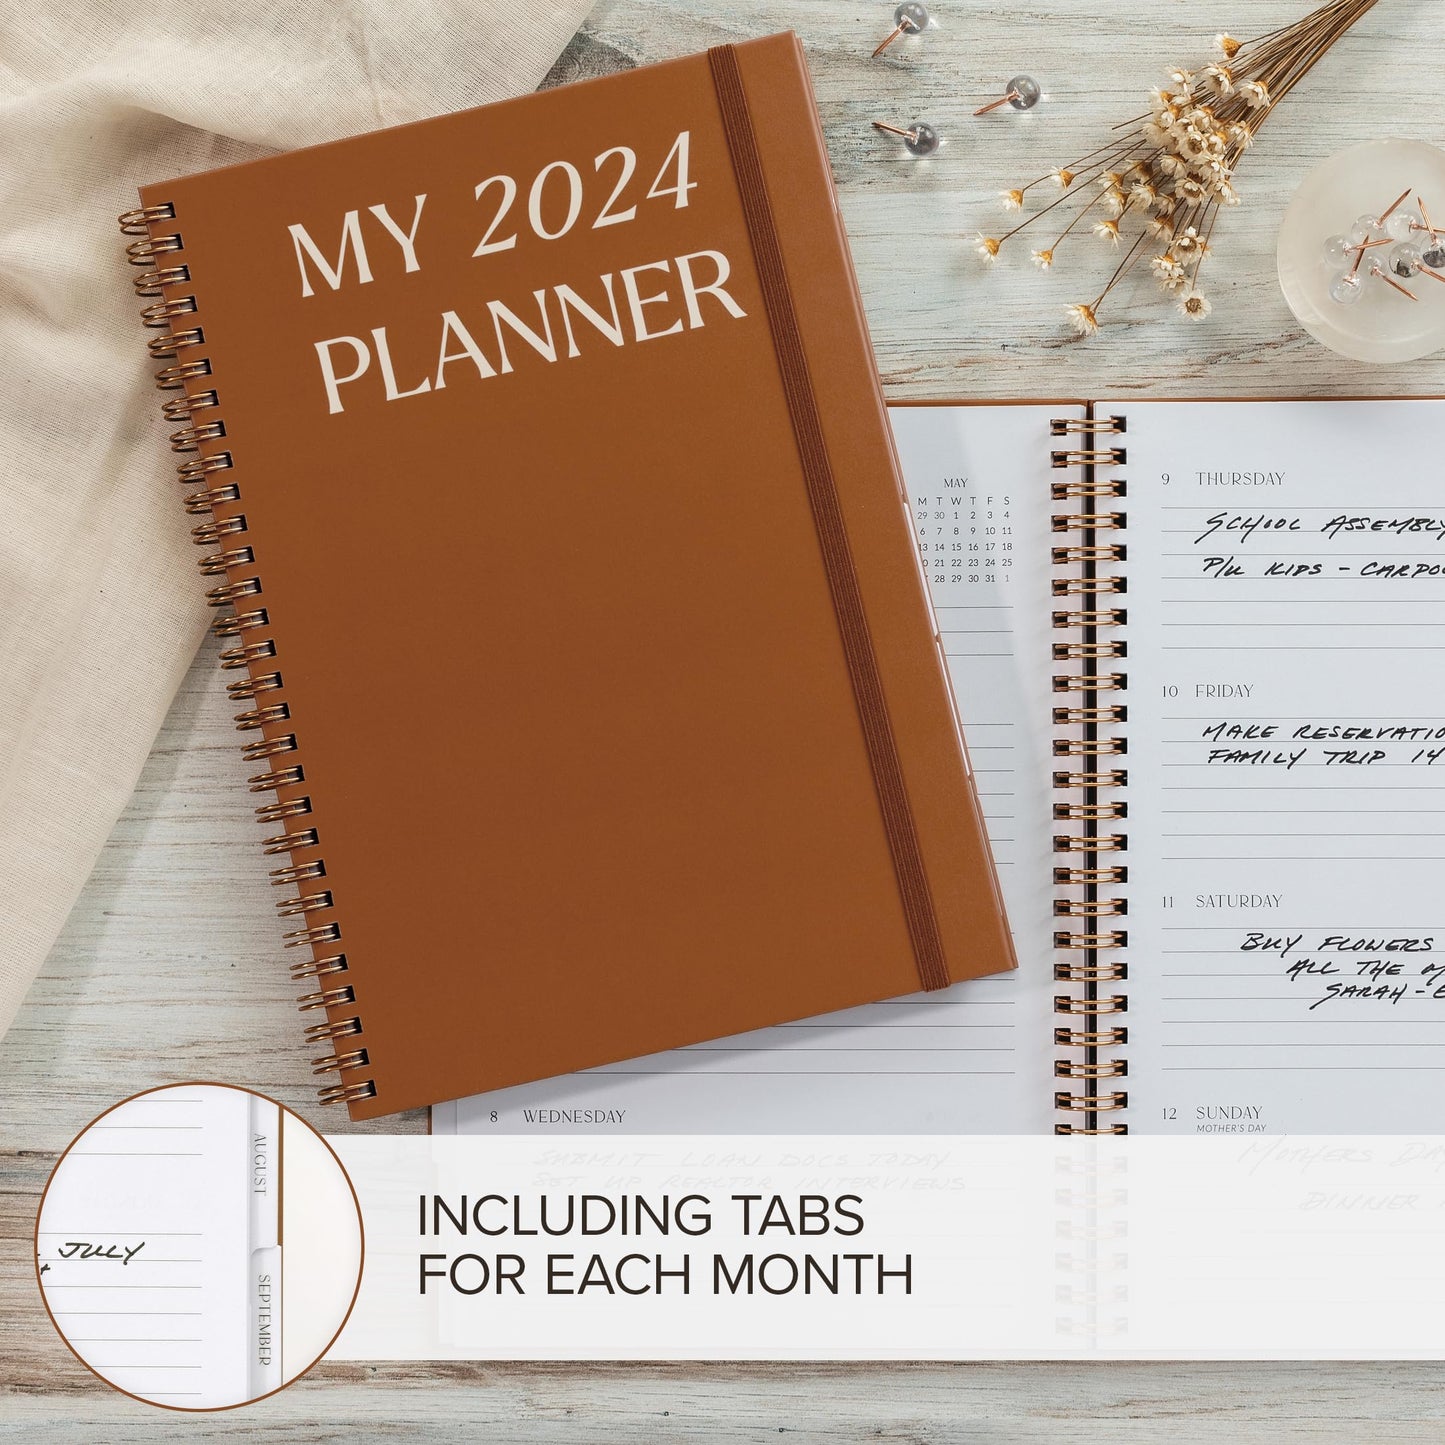 Simplified 2024 Daily Planner - Beautiful 7" x 10" Daily Planner for Women or Men with Weekly & Monthly Spreads for Easy Planning - Perfect Spiral Bound Calender Book To Organize All Tasks